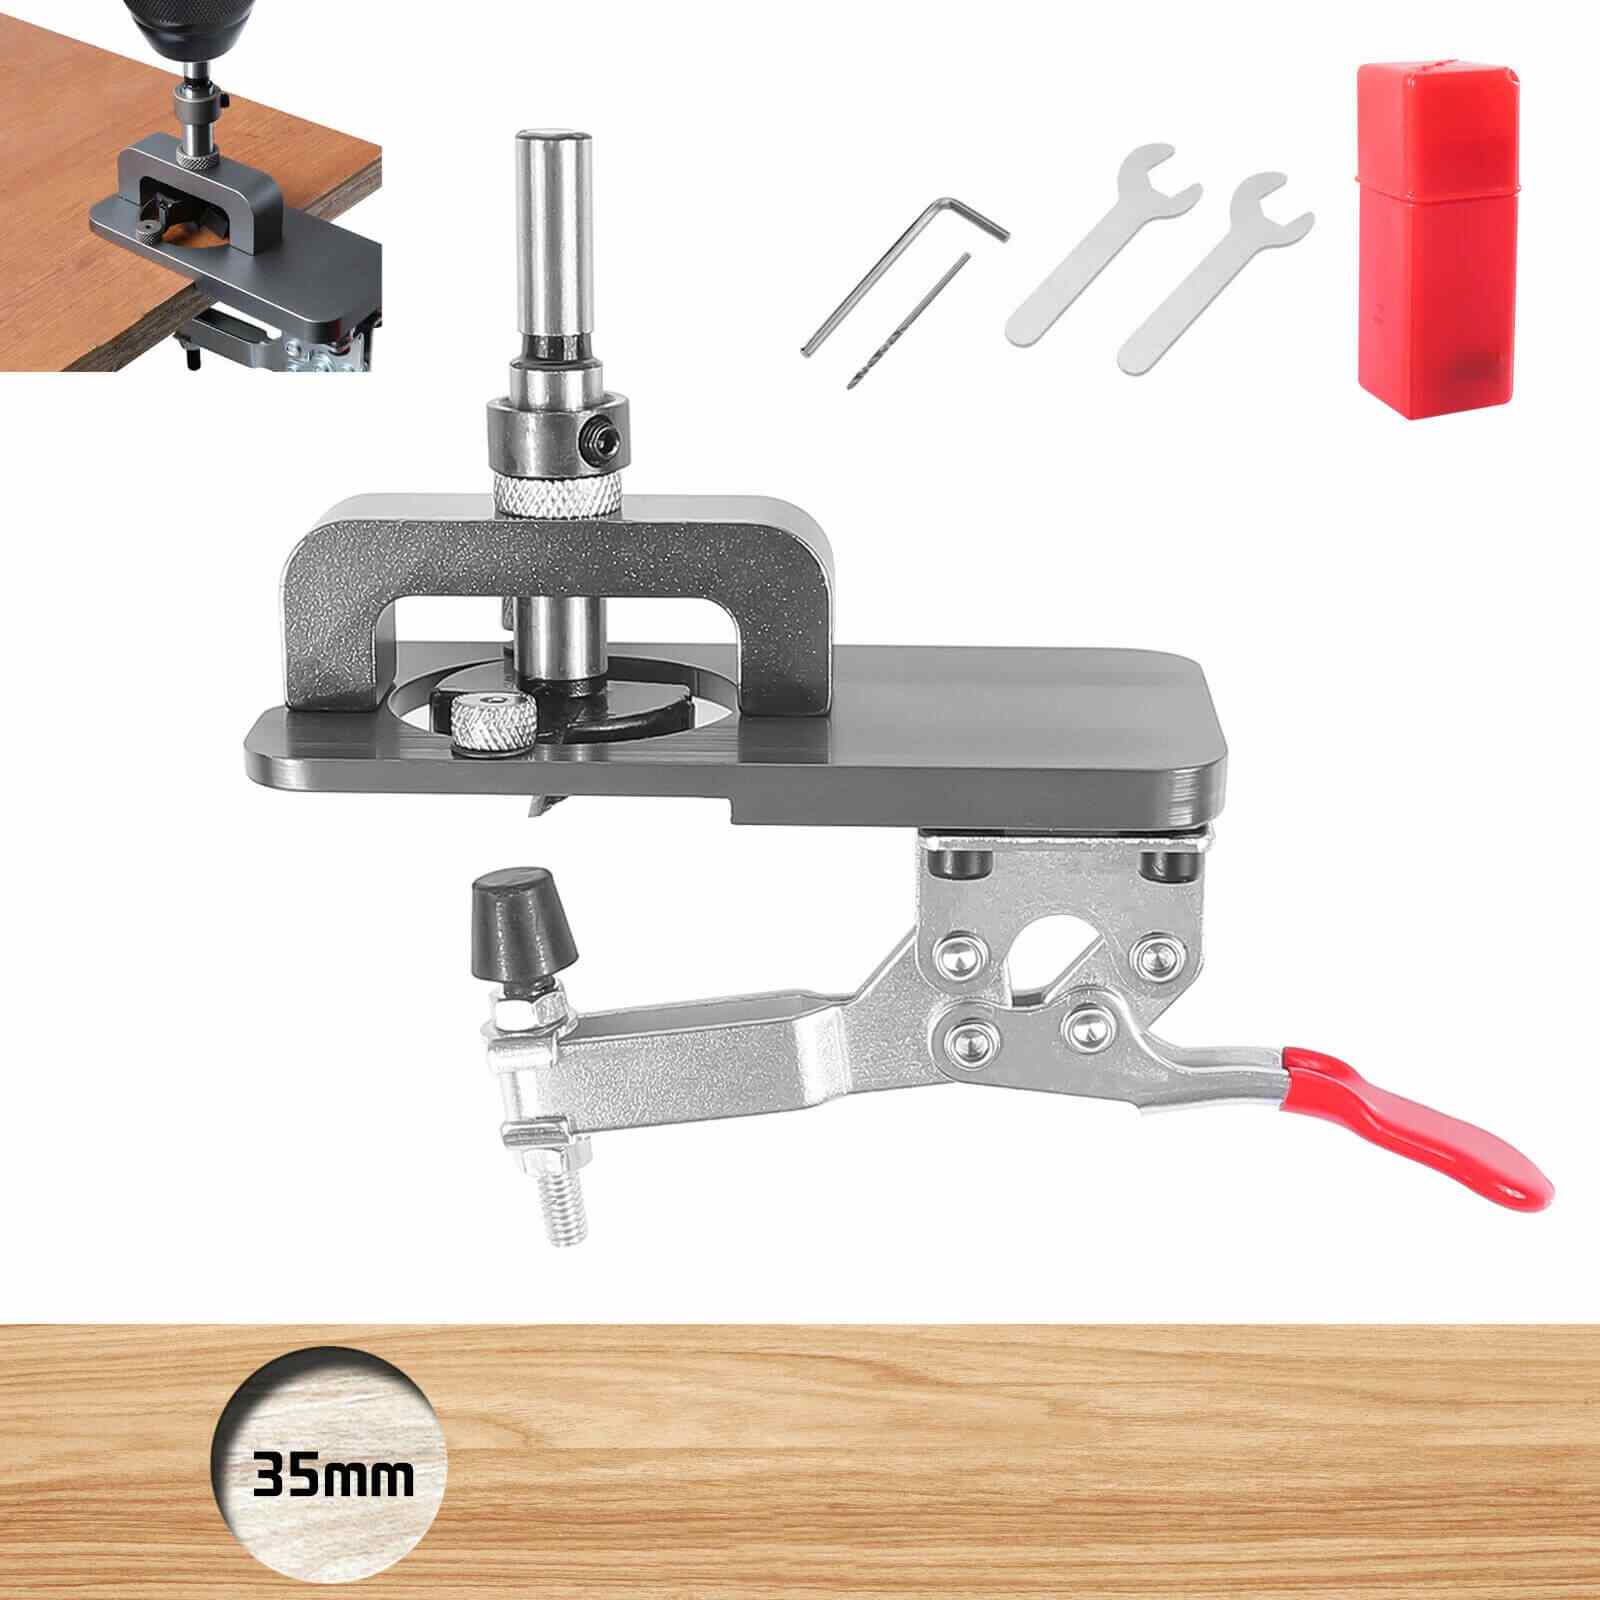 High Quality and Durable 35mm Hinge Hole Jig Punch Locator Kit